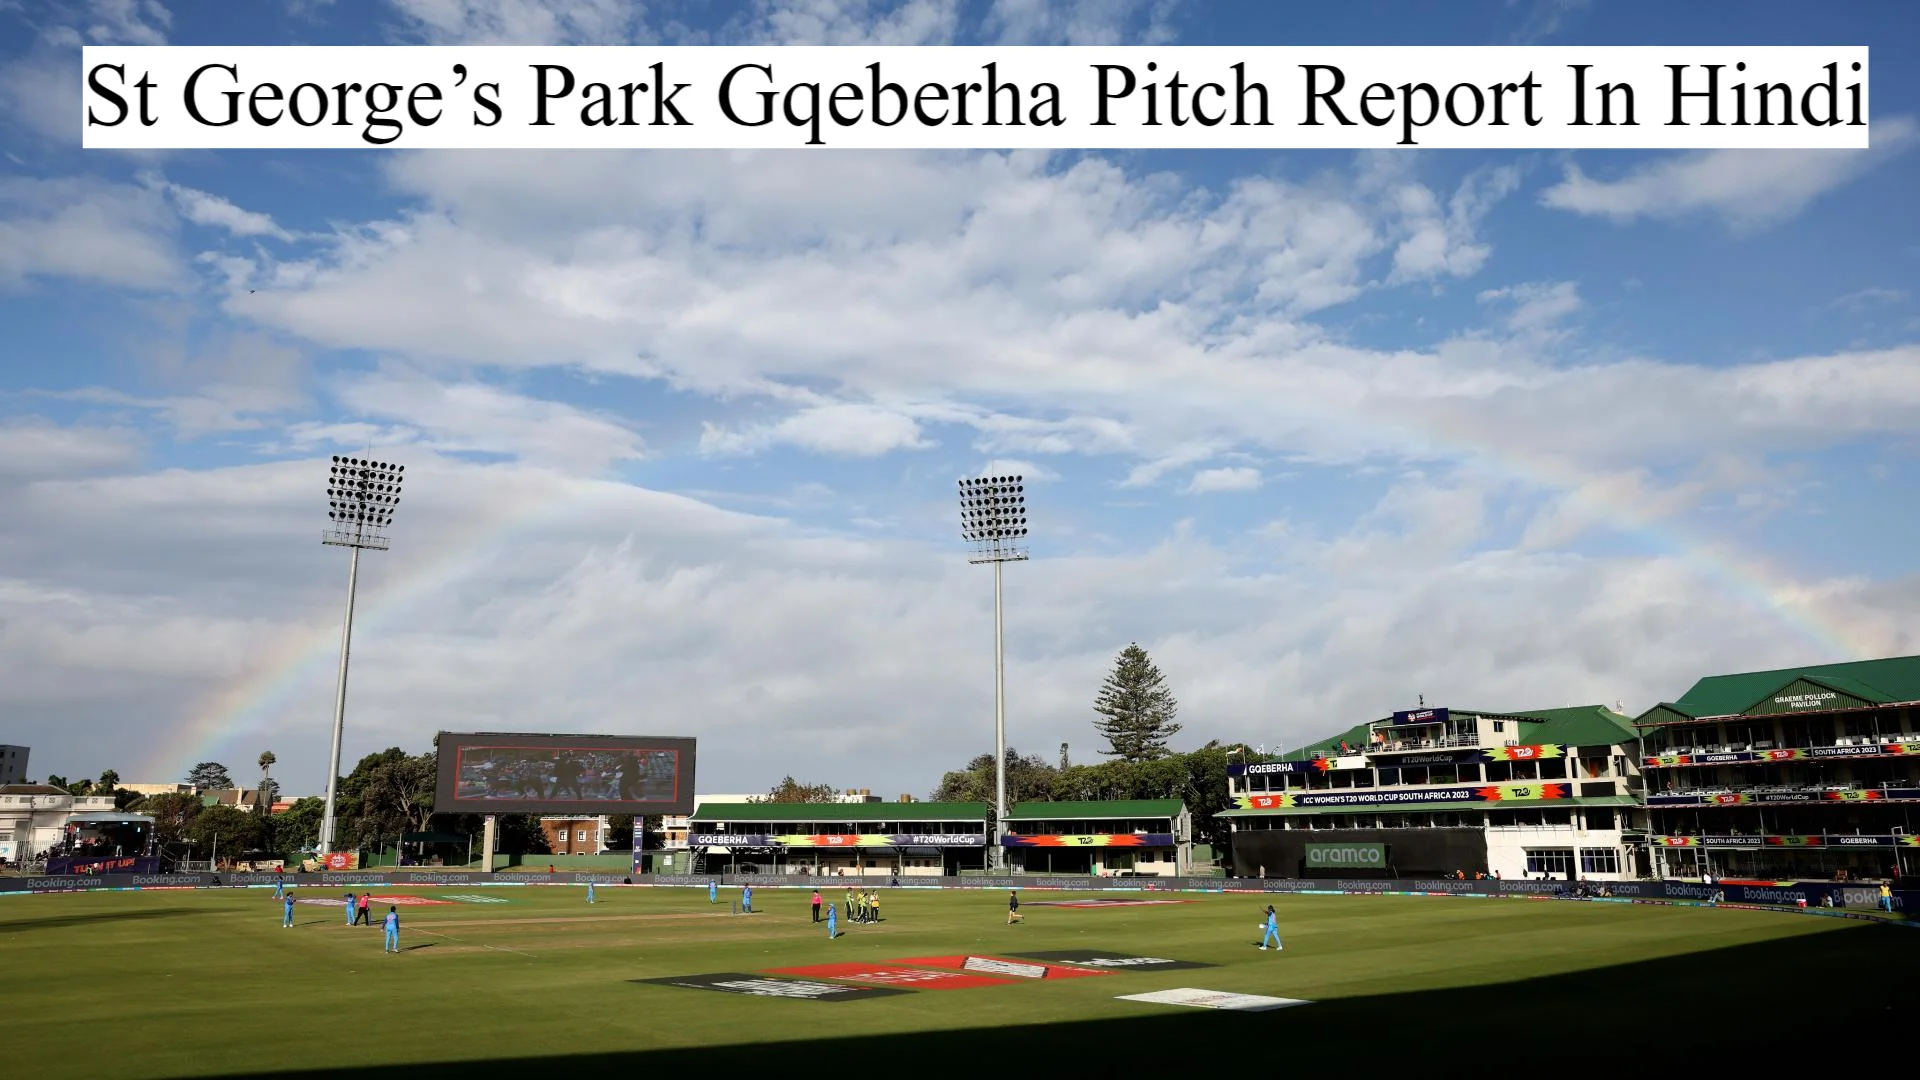 St George’s Park Gqeberha Pitch Report In Hindi | St George’s Park Gqeberha पिच रिपोर्ट